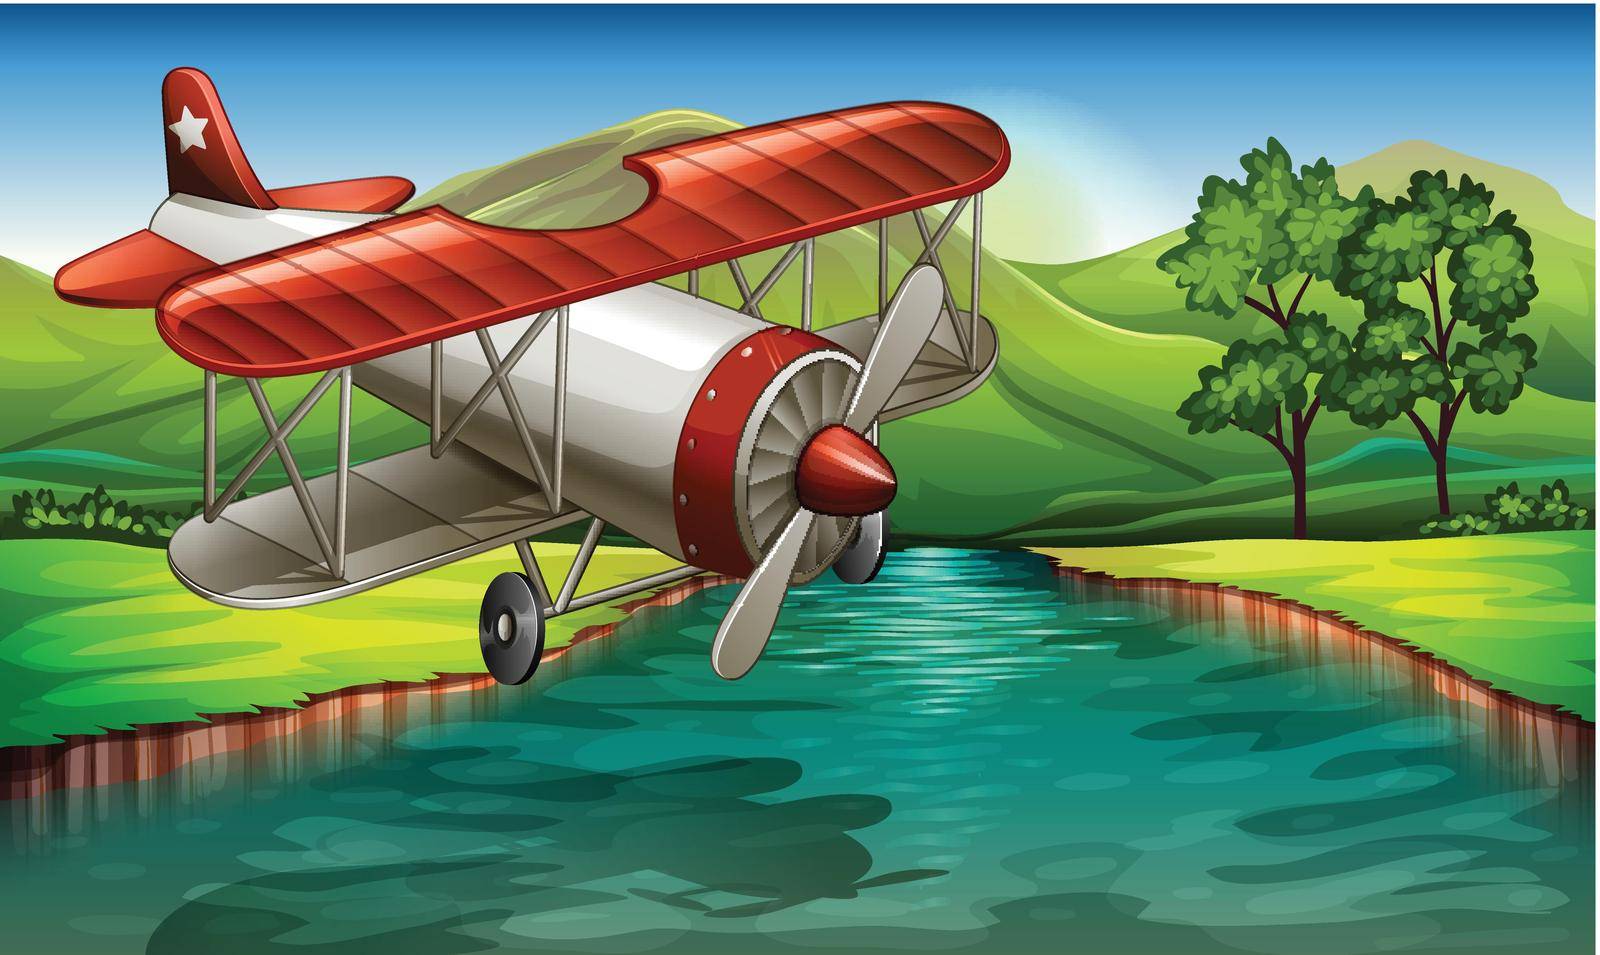 Illustration of an airplane flying over the river